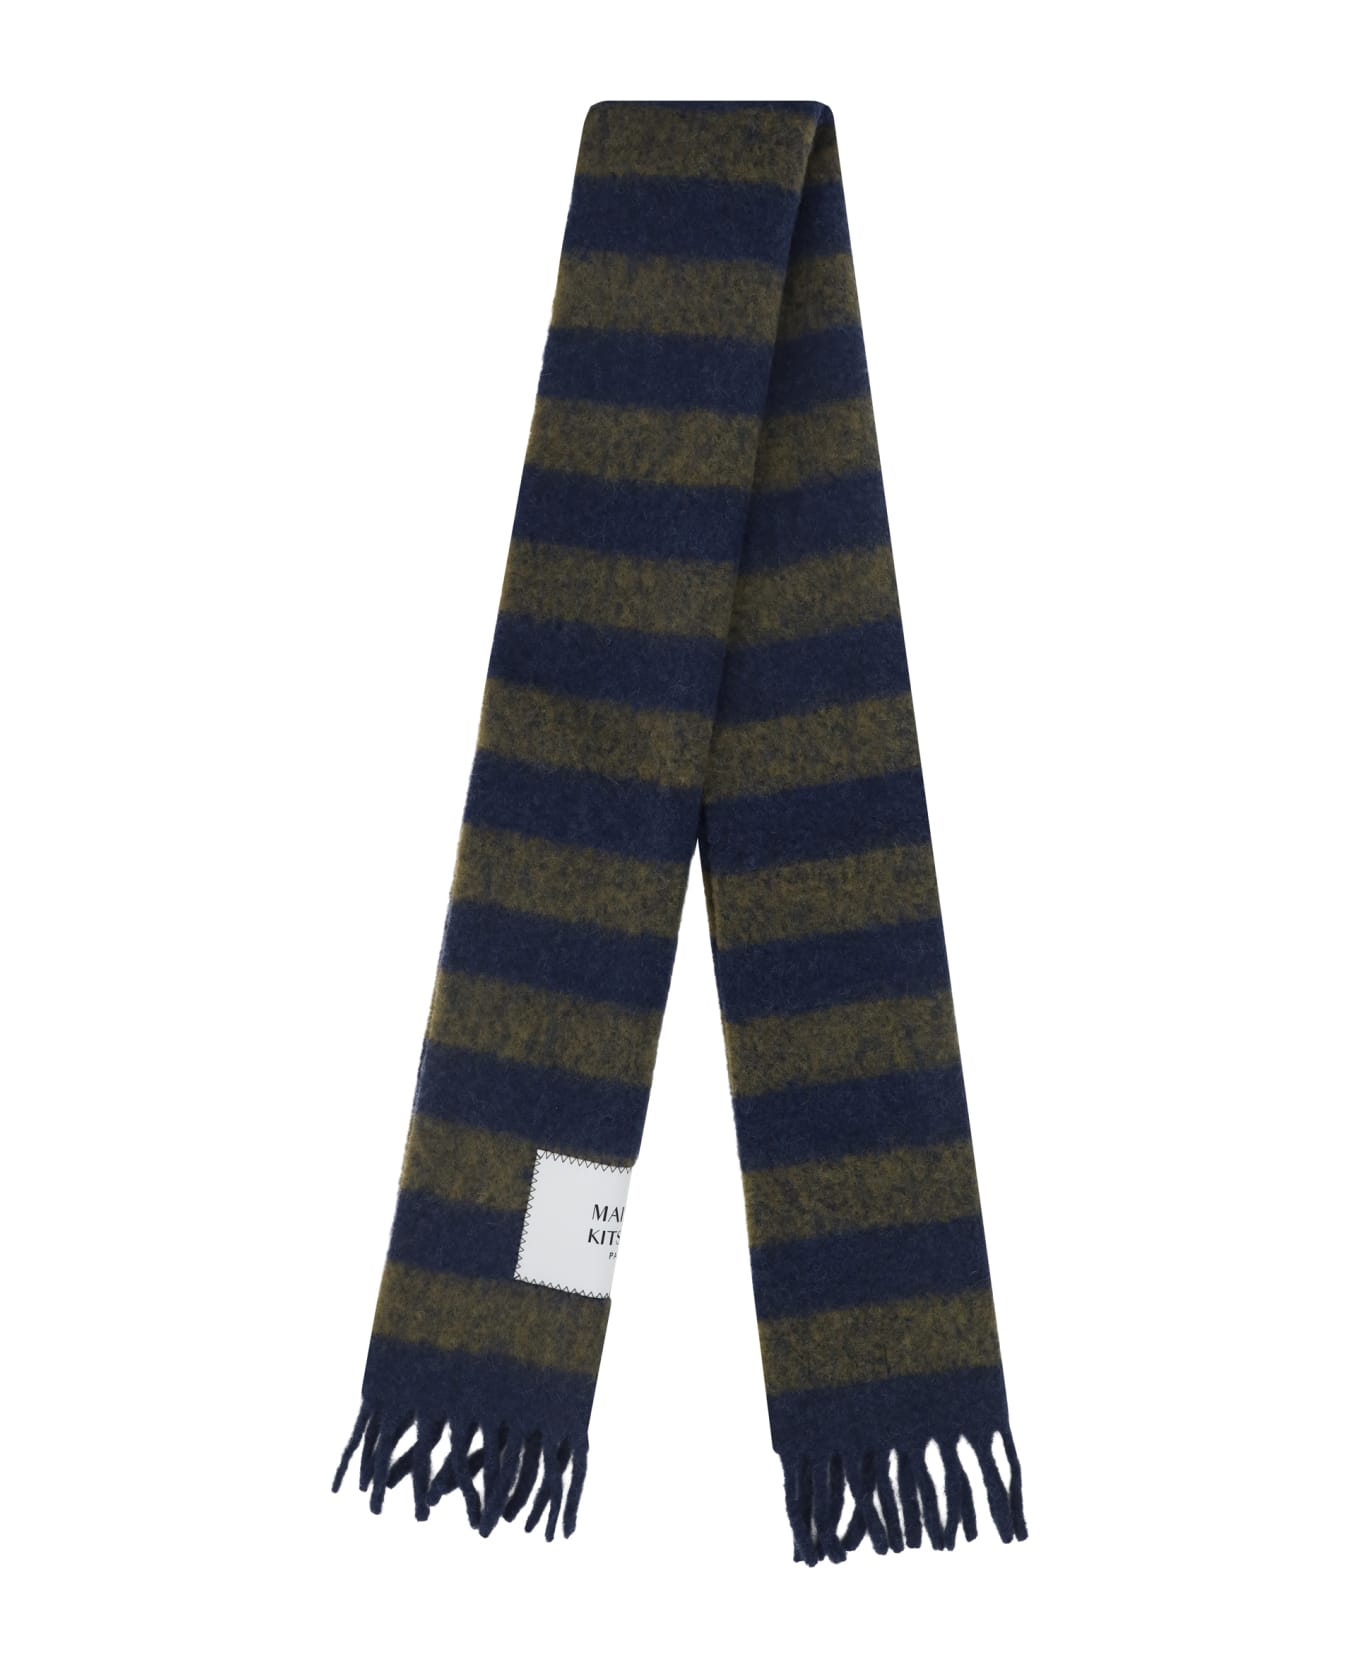 Maison Kitsuné Rugby Scarf - Gifts for Him